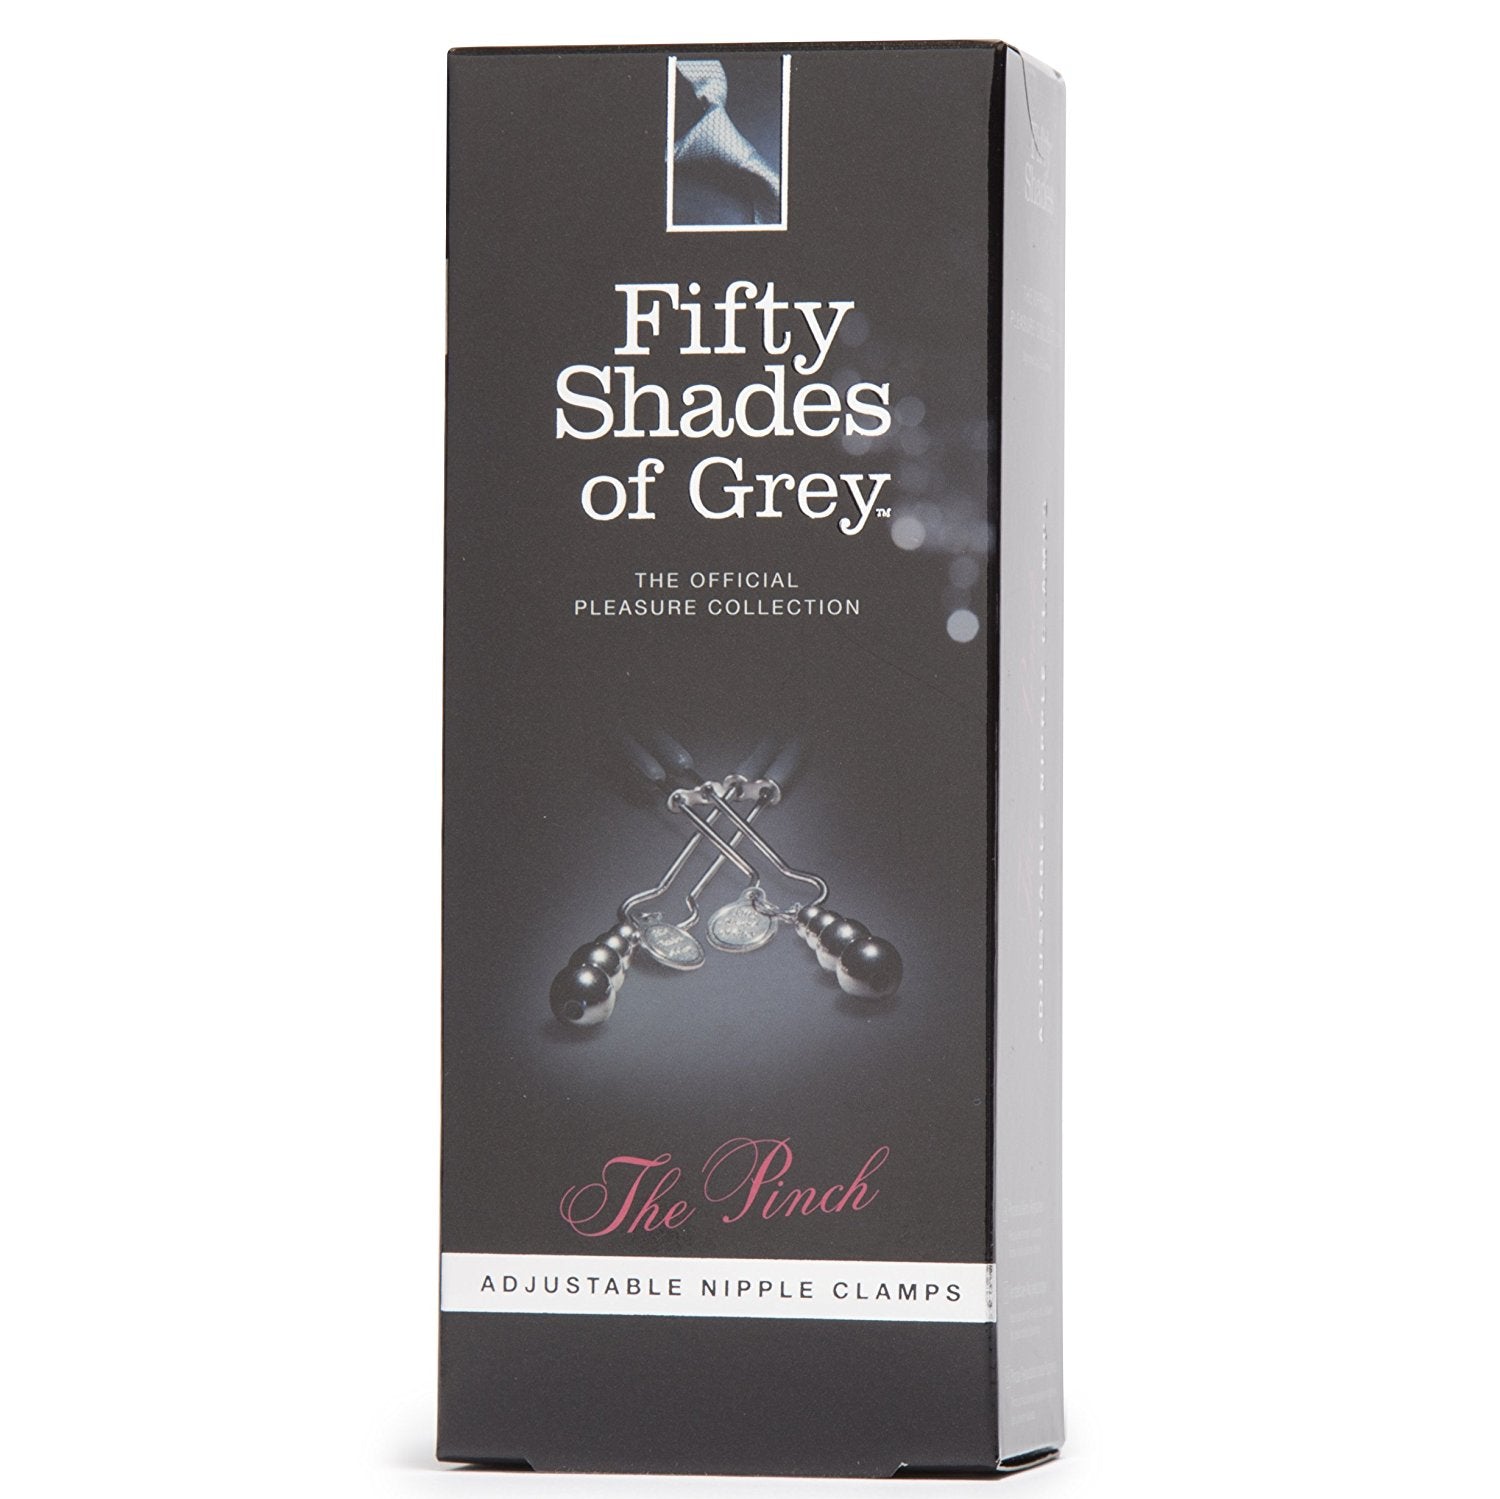 Fifty Shades of Grey - The Pinch Adjustable Nipple Clamps Nipple Clamps (Non Vibration) Durio Asia